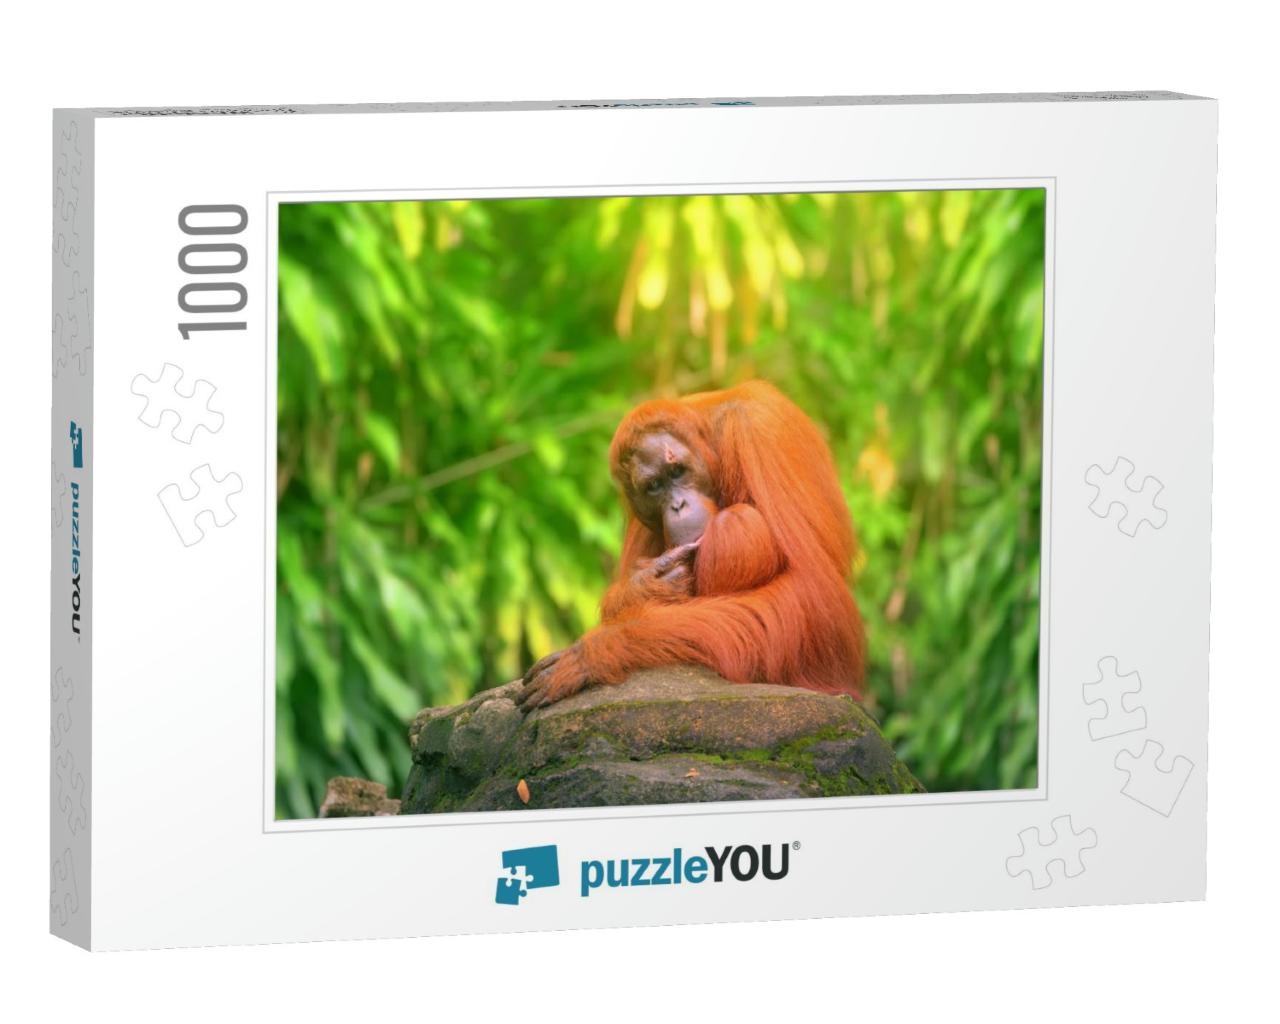 Adult Orangutan Sitting with Jungle as a Background... Jigsaw Puzzle with 1000 pieces